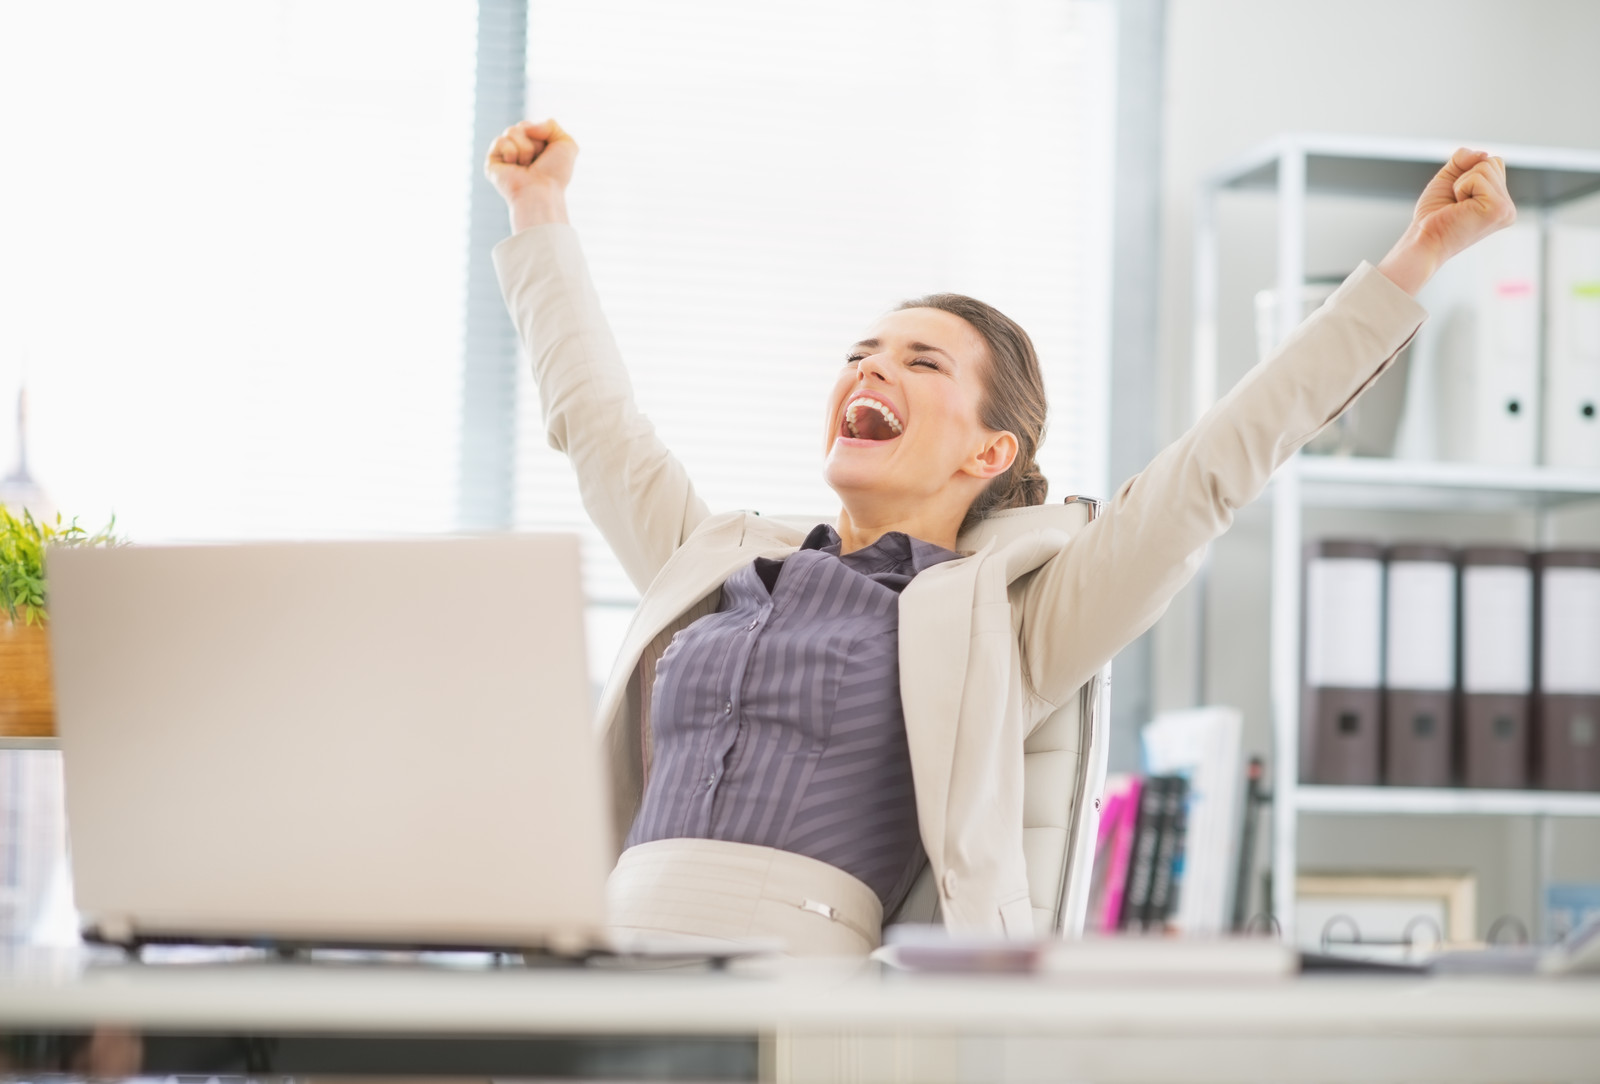 8 Simple ways to get promoted while working happily